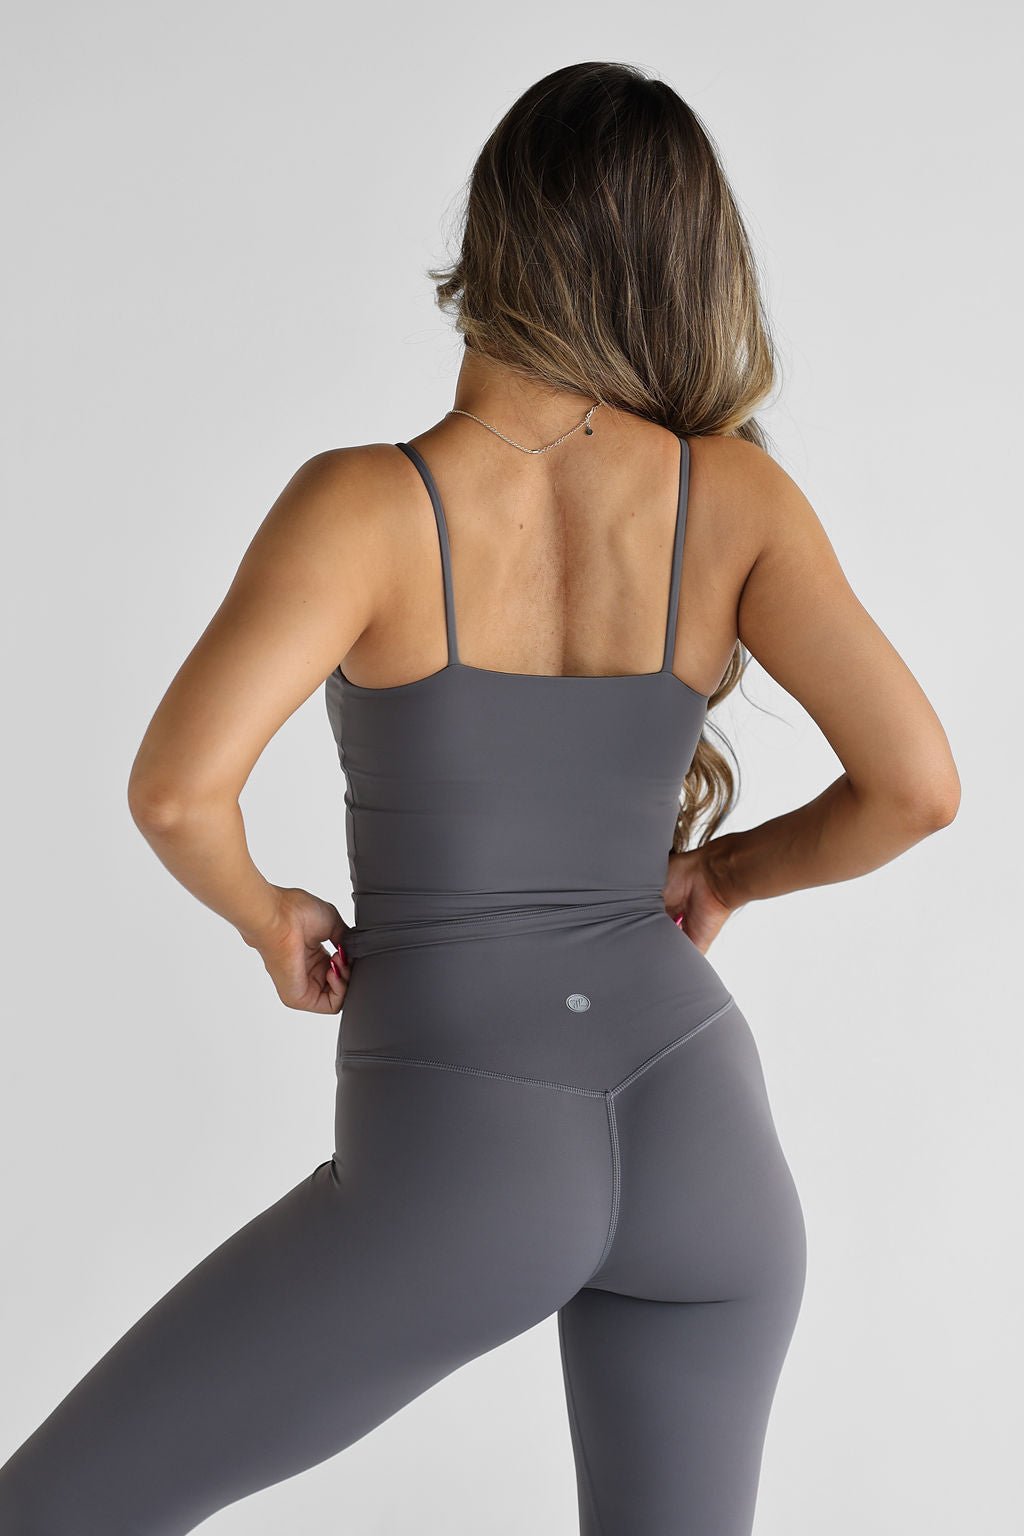 SCULPT Bike Shorts - Charcoal, High Waisted, Squat Proof, 5 Star Rated